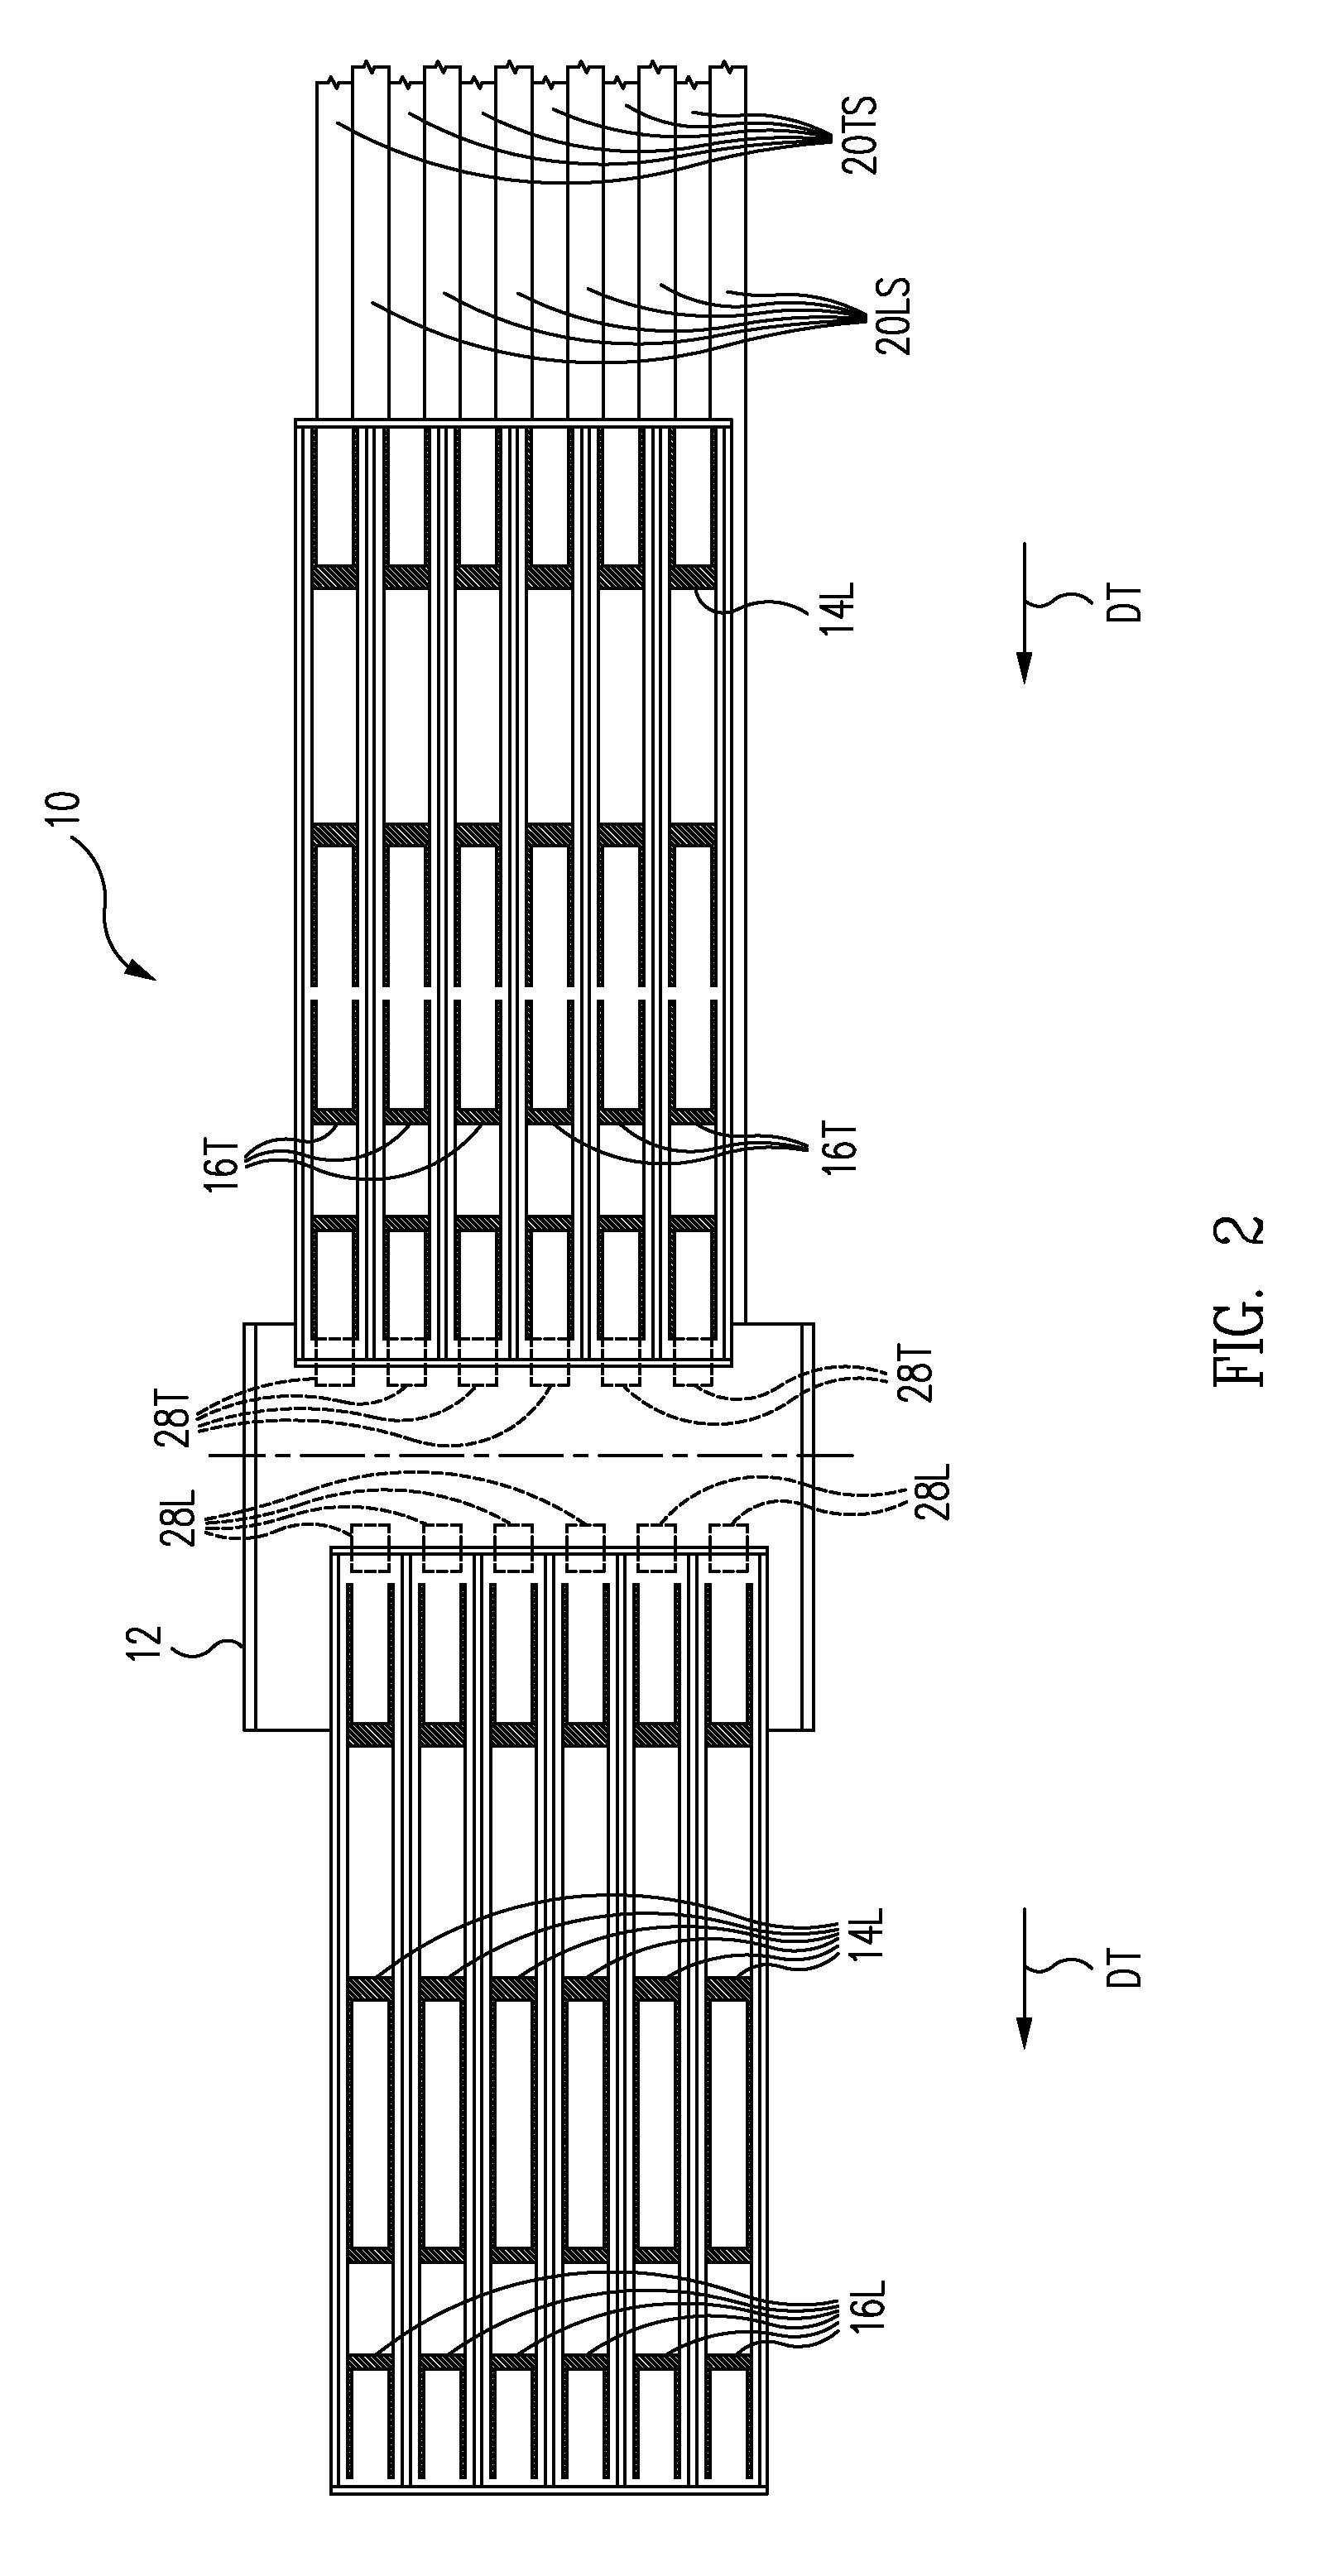 Graphite Tape Supply and Backing Paper Take-Up Apparatus